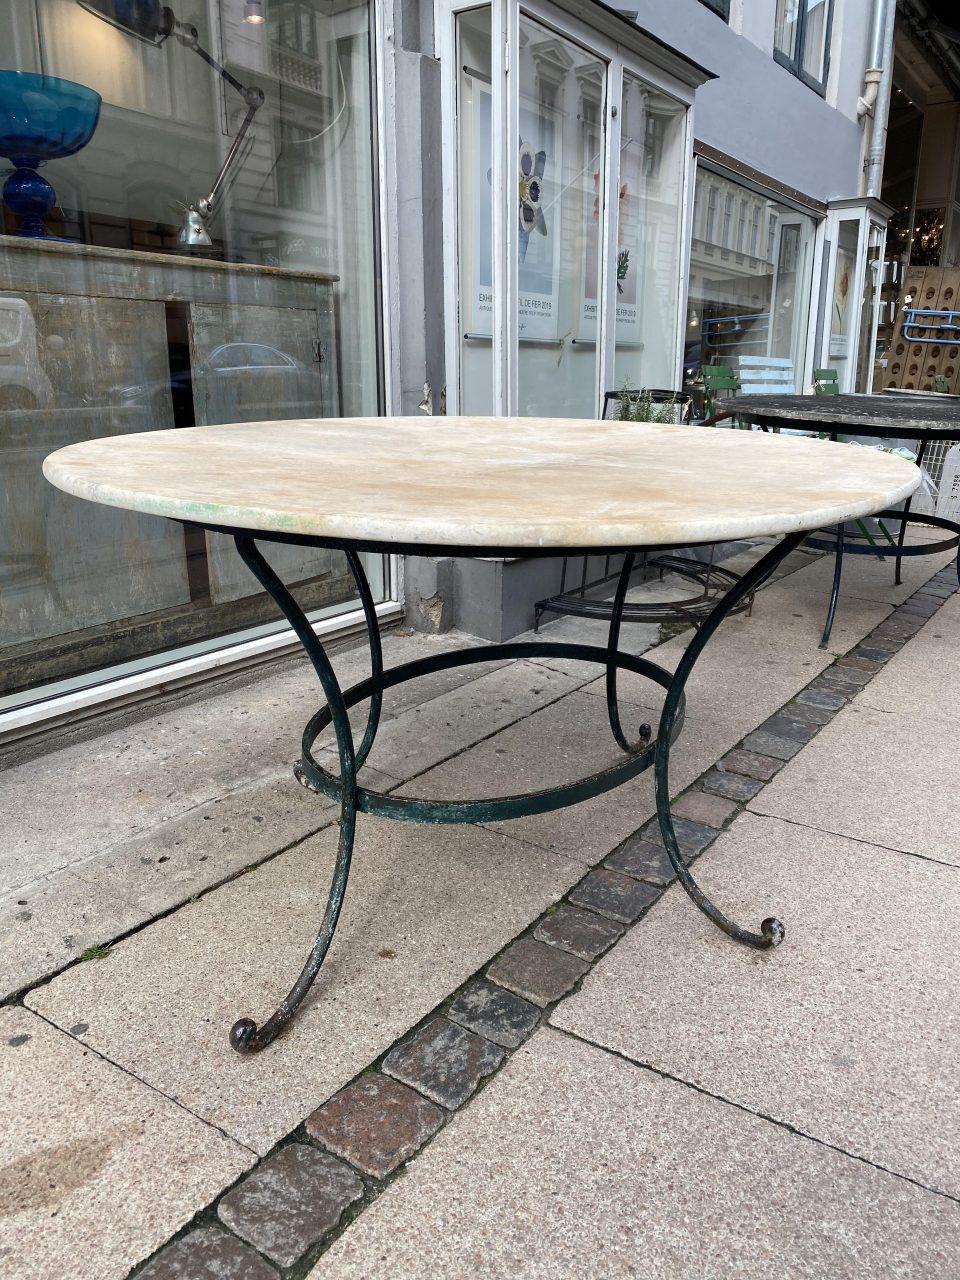 Super elegant vintage French marble table, with a beautifully curved base in carriage green painted wrought iron. A lovely large elliptical solid marble top, easily room for 6 people to sit around.

The table has the most delicious raw and